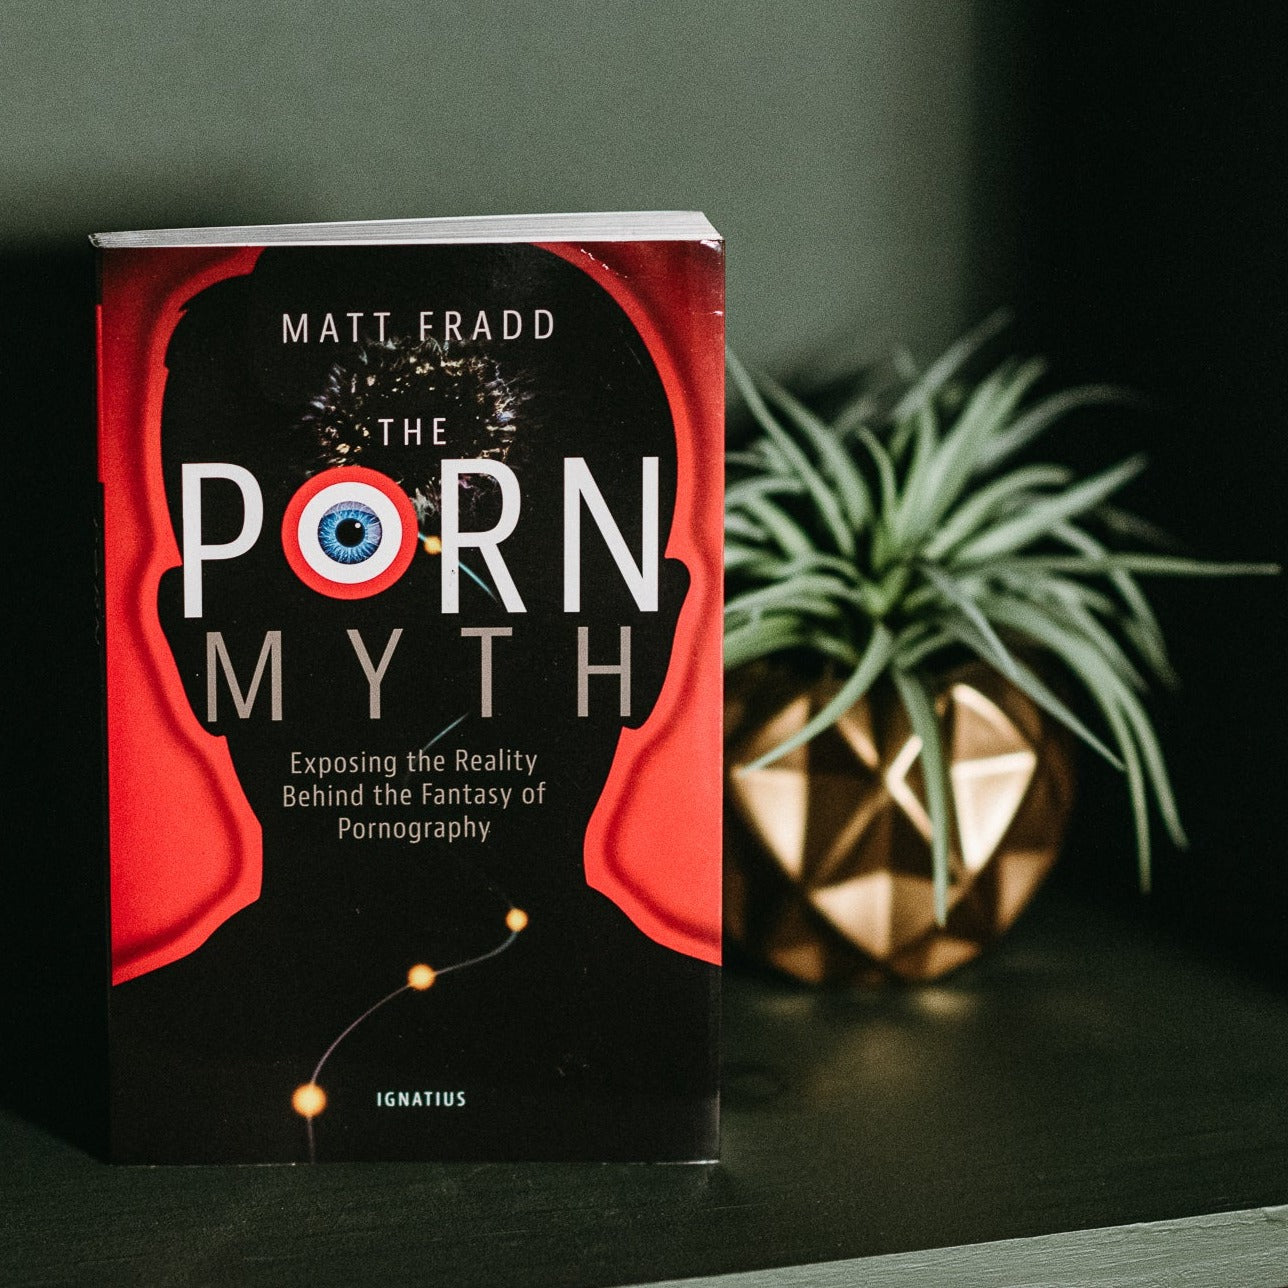 The Porn Myth - Exposing the Reality Behind the Fantasy of Pornography